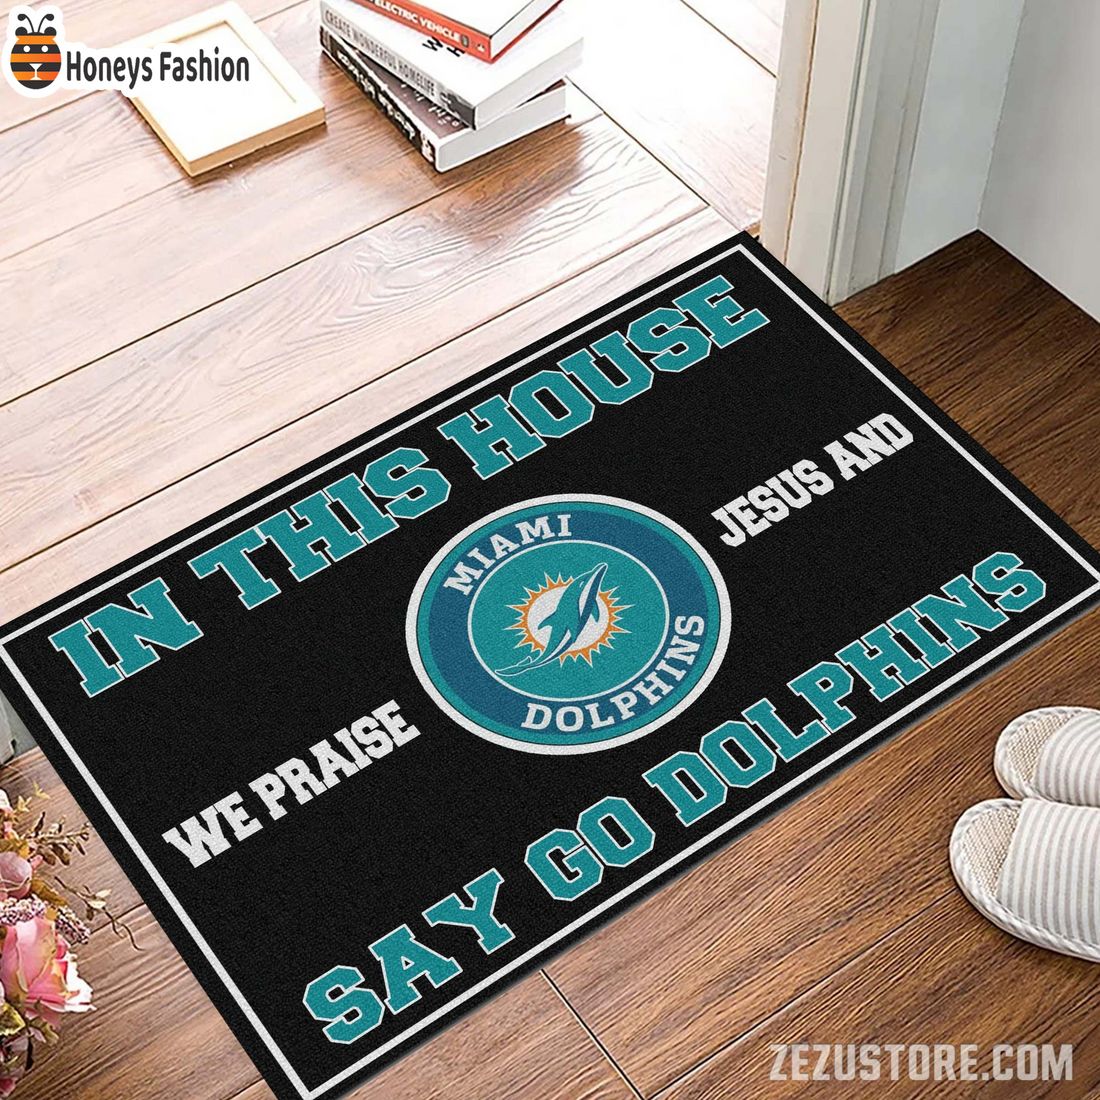 In this house we praise jesus and say go Dolphins doormat